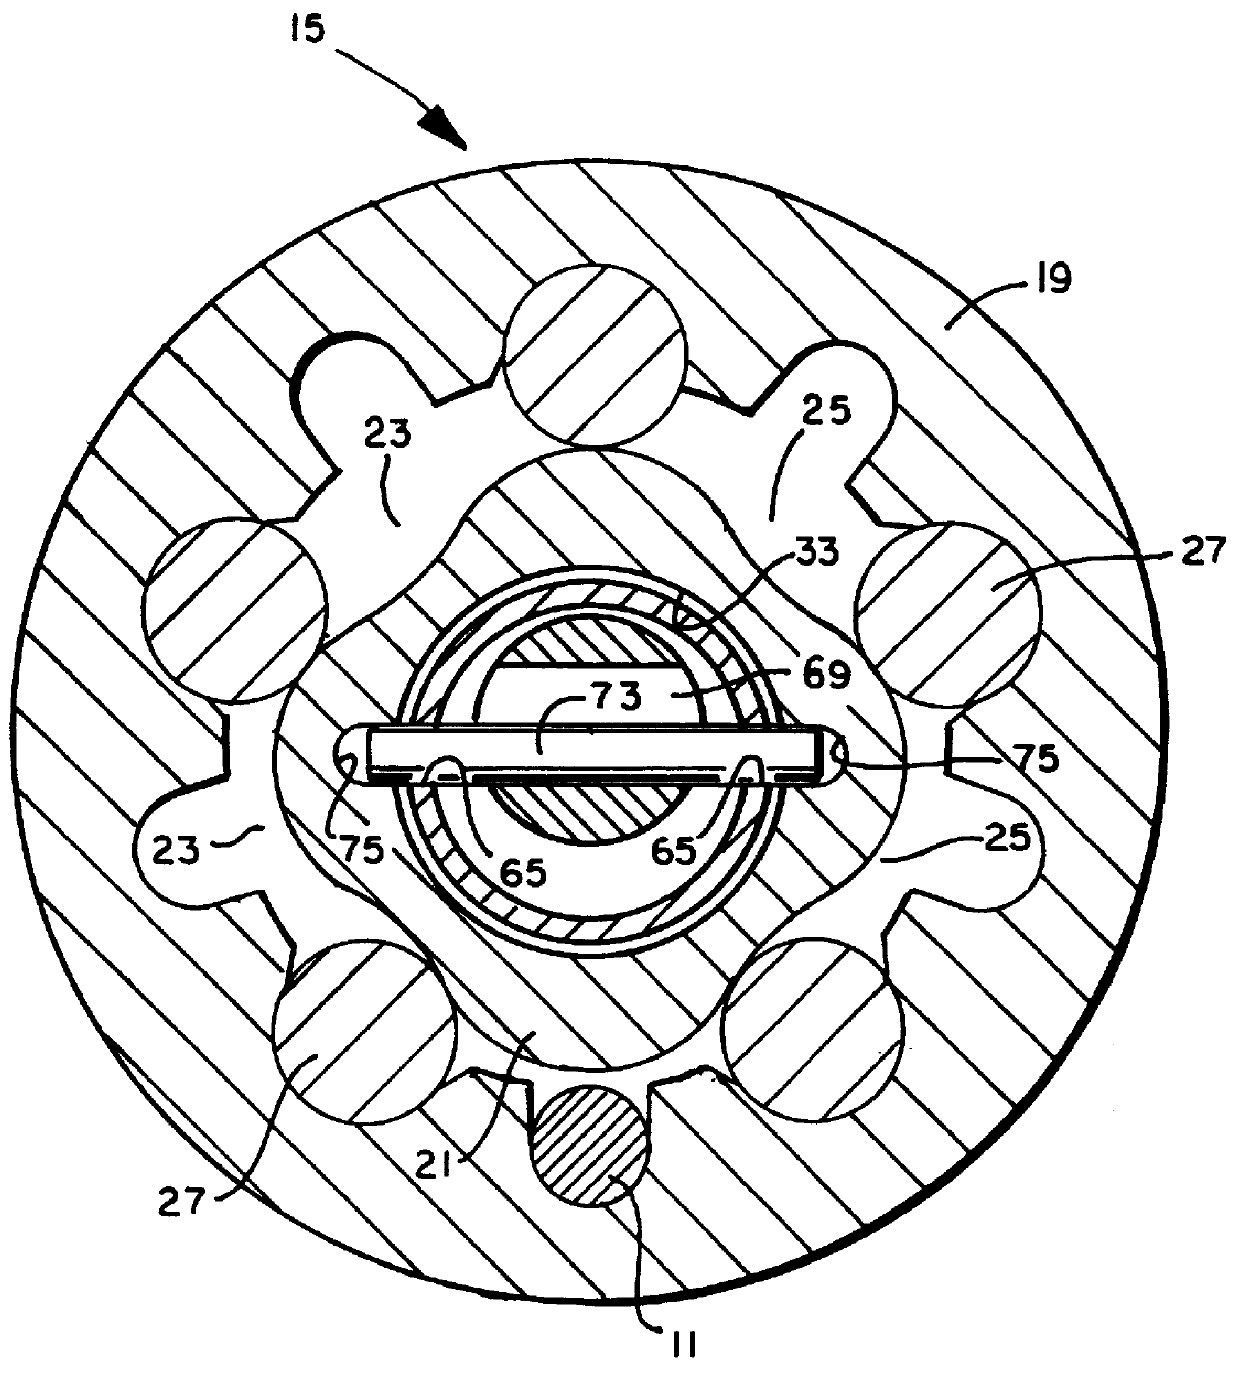 Coupling for use with a gerotor device